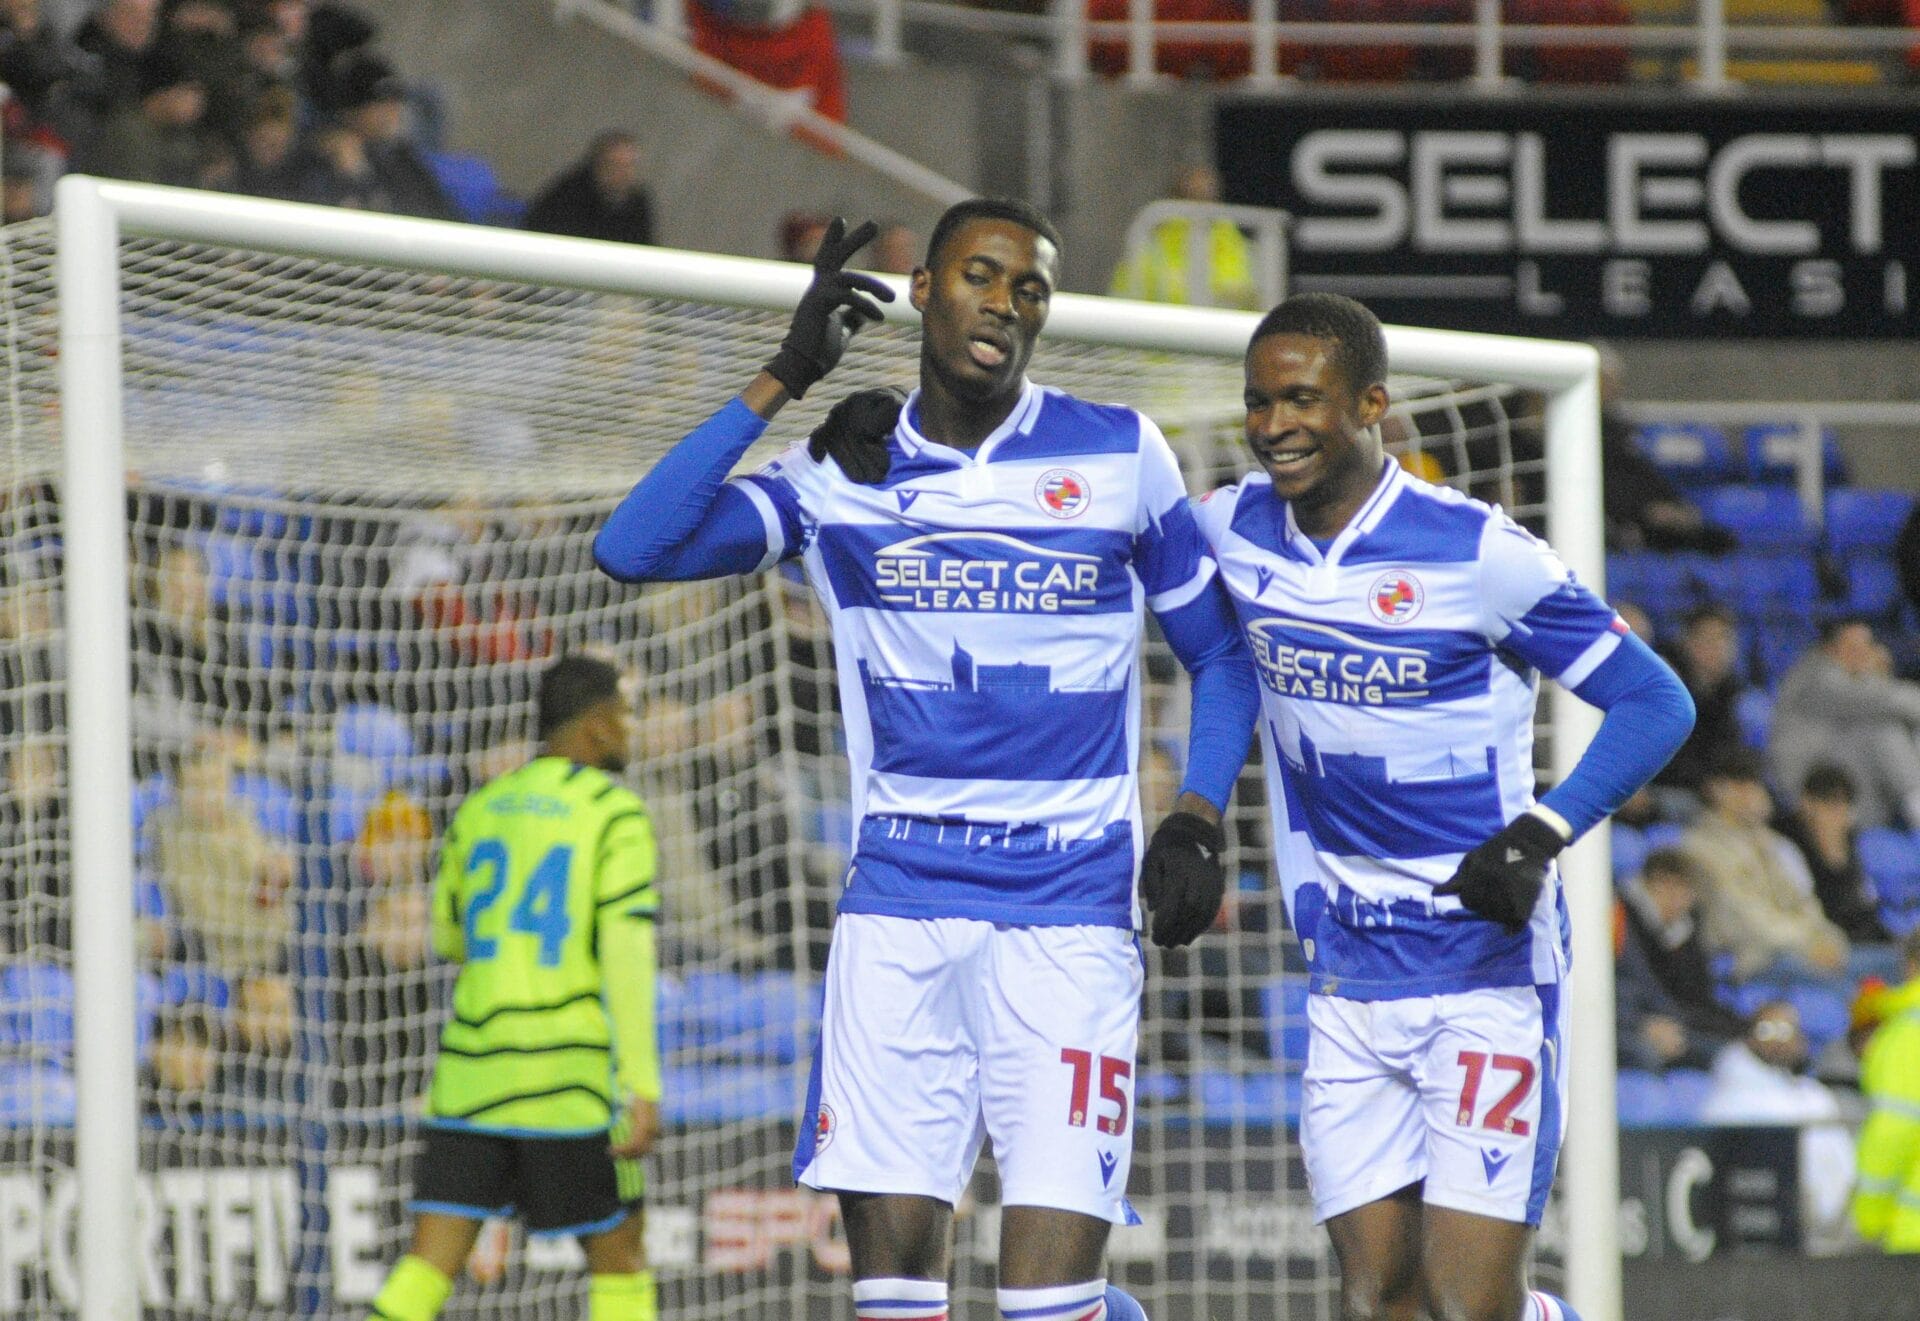 Royals aim for long awaited away win – Reading Today Online